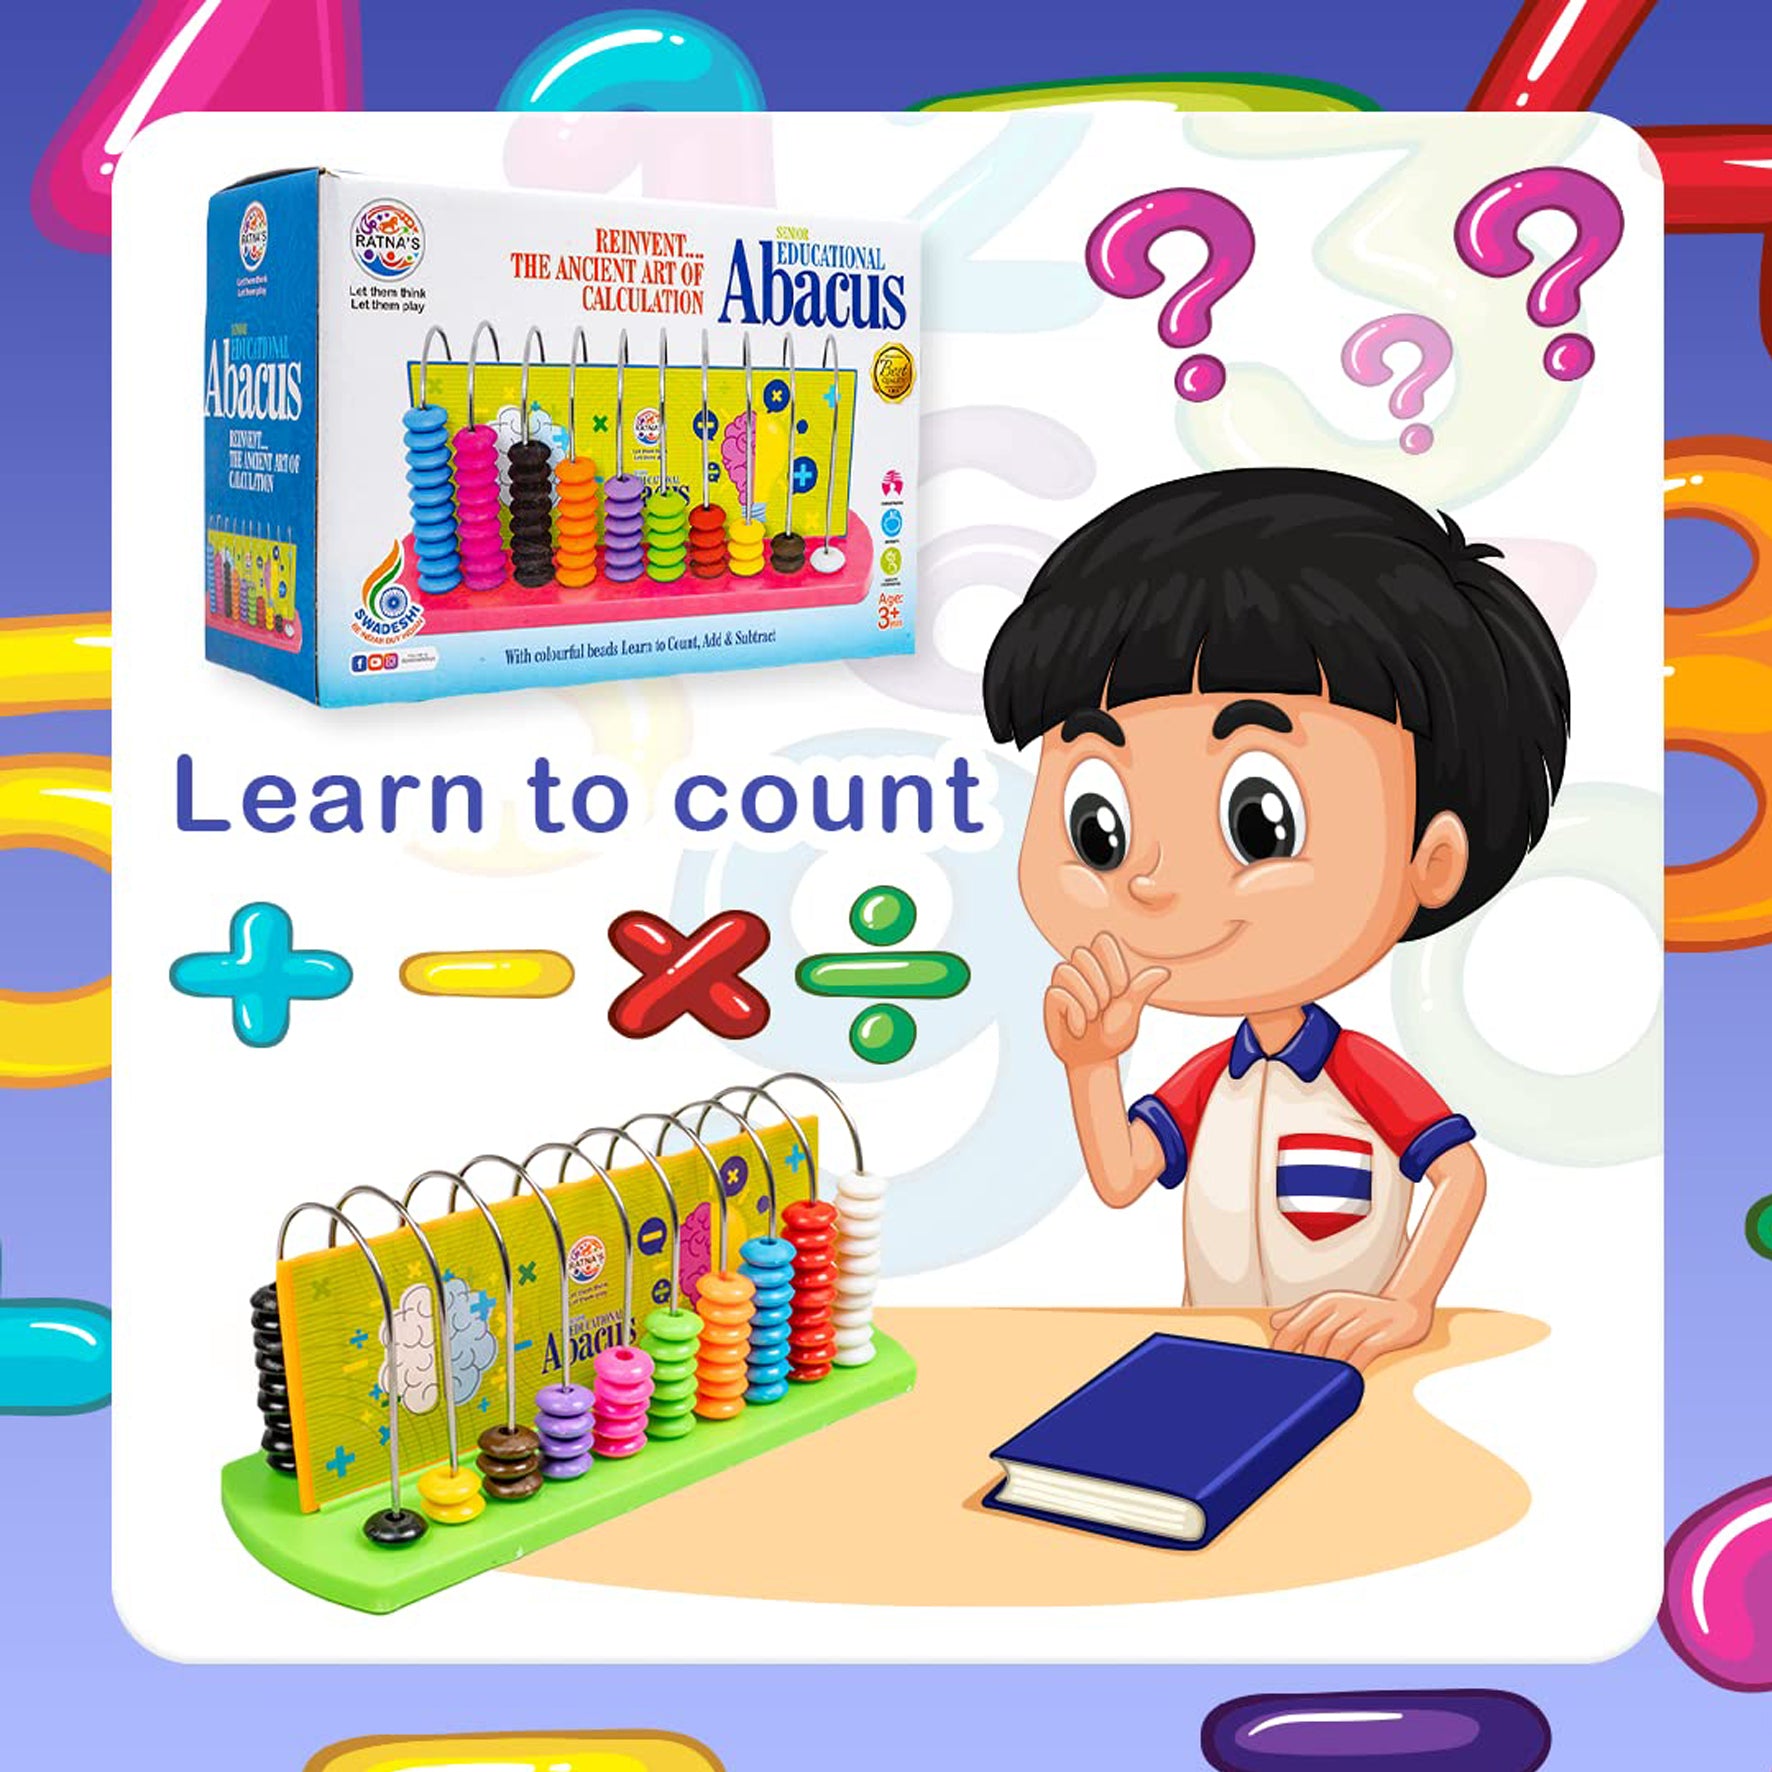 Ratna's Educational Abacus Senior for Kids to Count, Add & Subtract with Colourful Beads